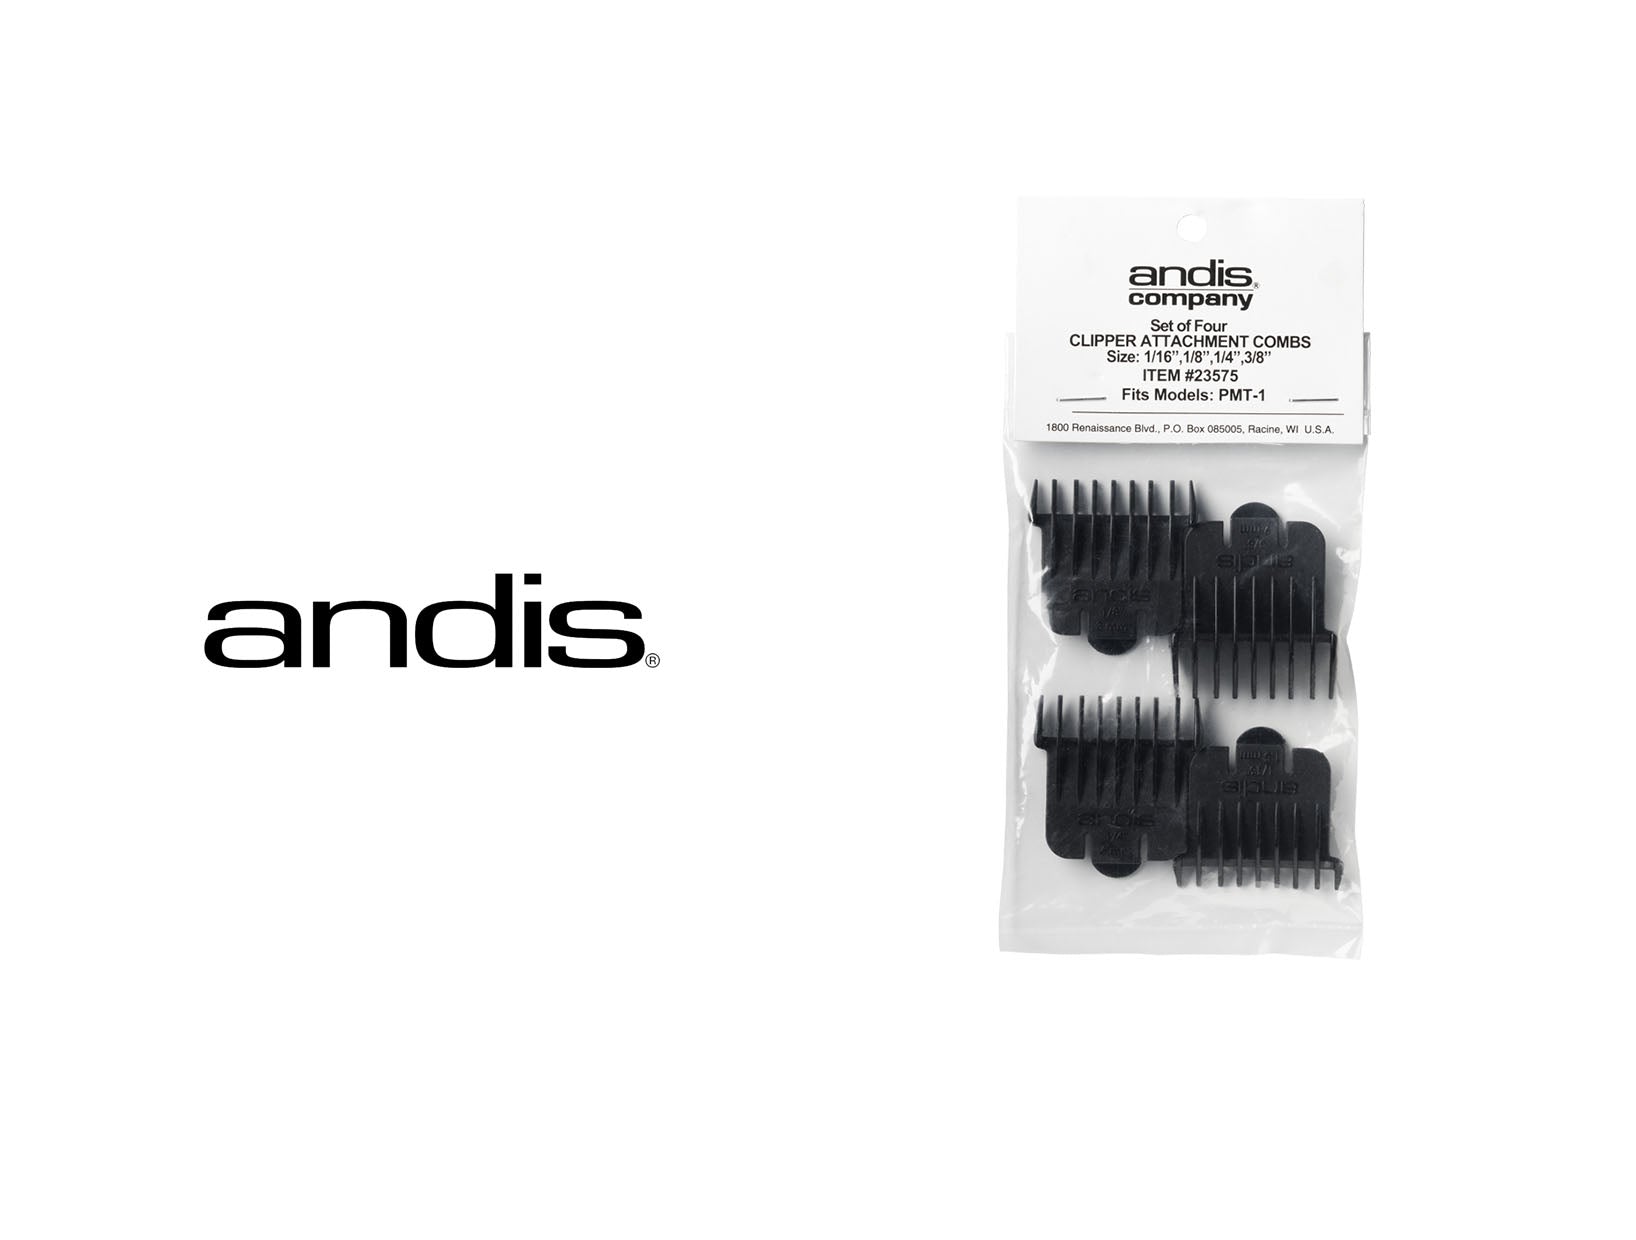 ANDIS ATTACH COMB T-OUTLINER GUIDE #23575